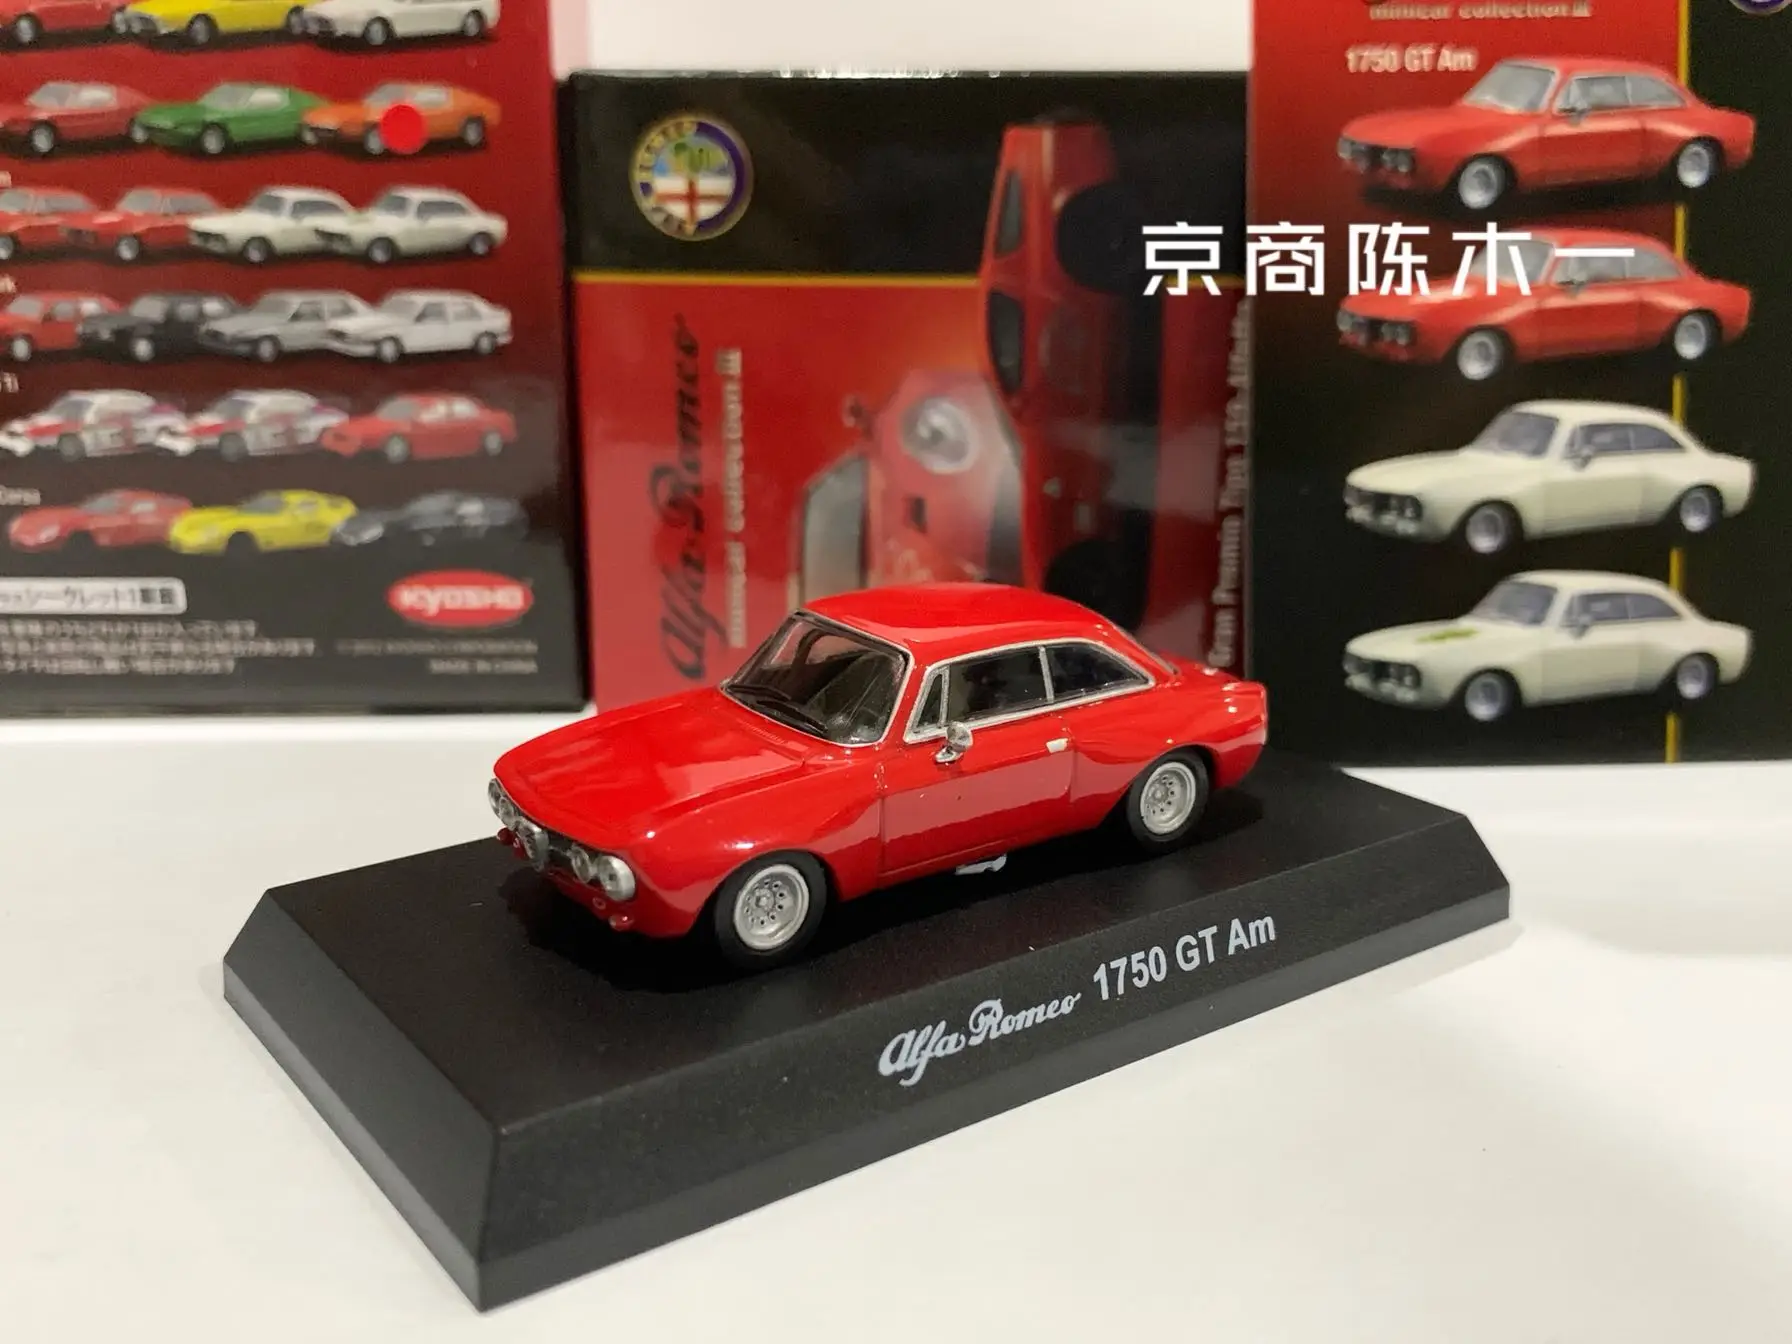 

1/64 KYOSHO Alfa Romeo 1750 GT Am LM F1 RACING Collection of die-cast alloy car decoration model toys